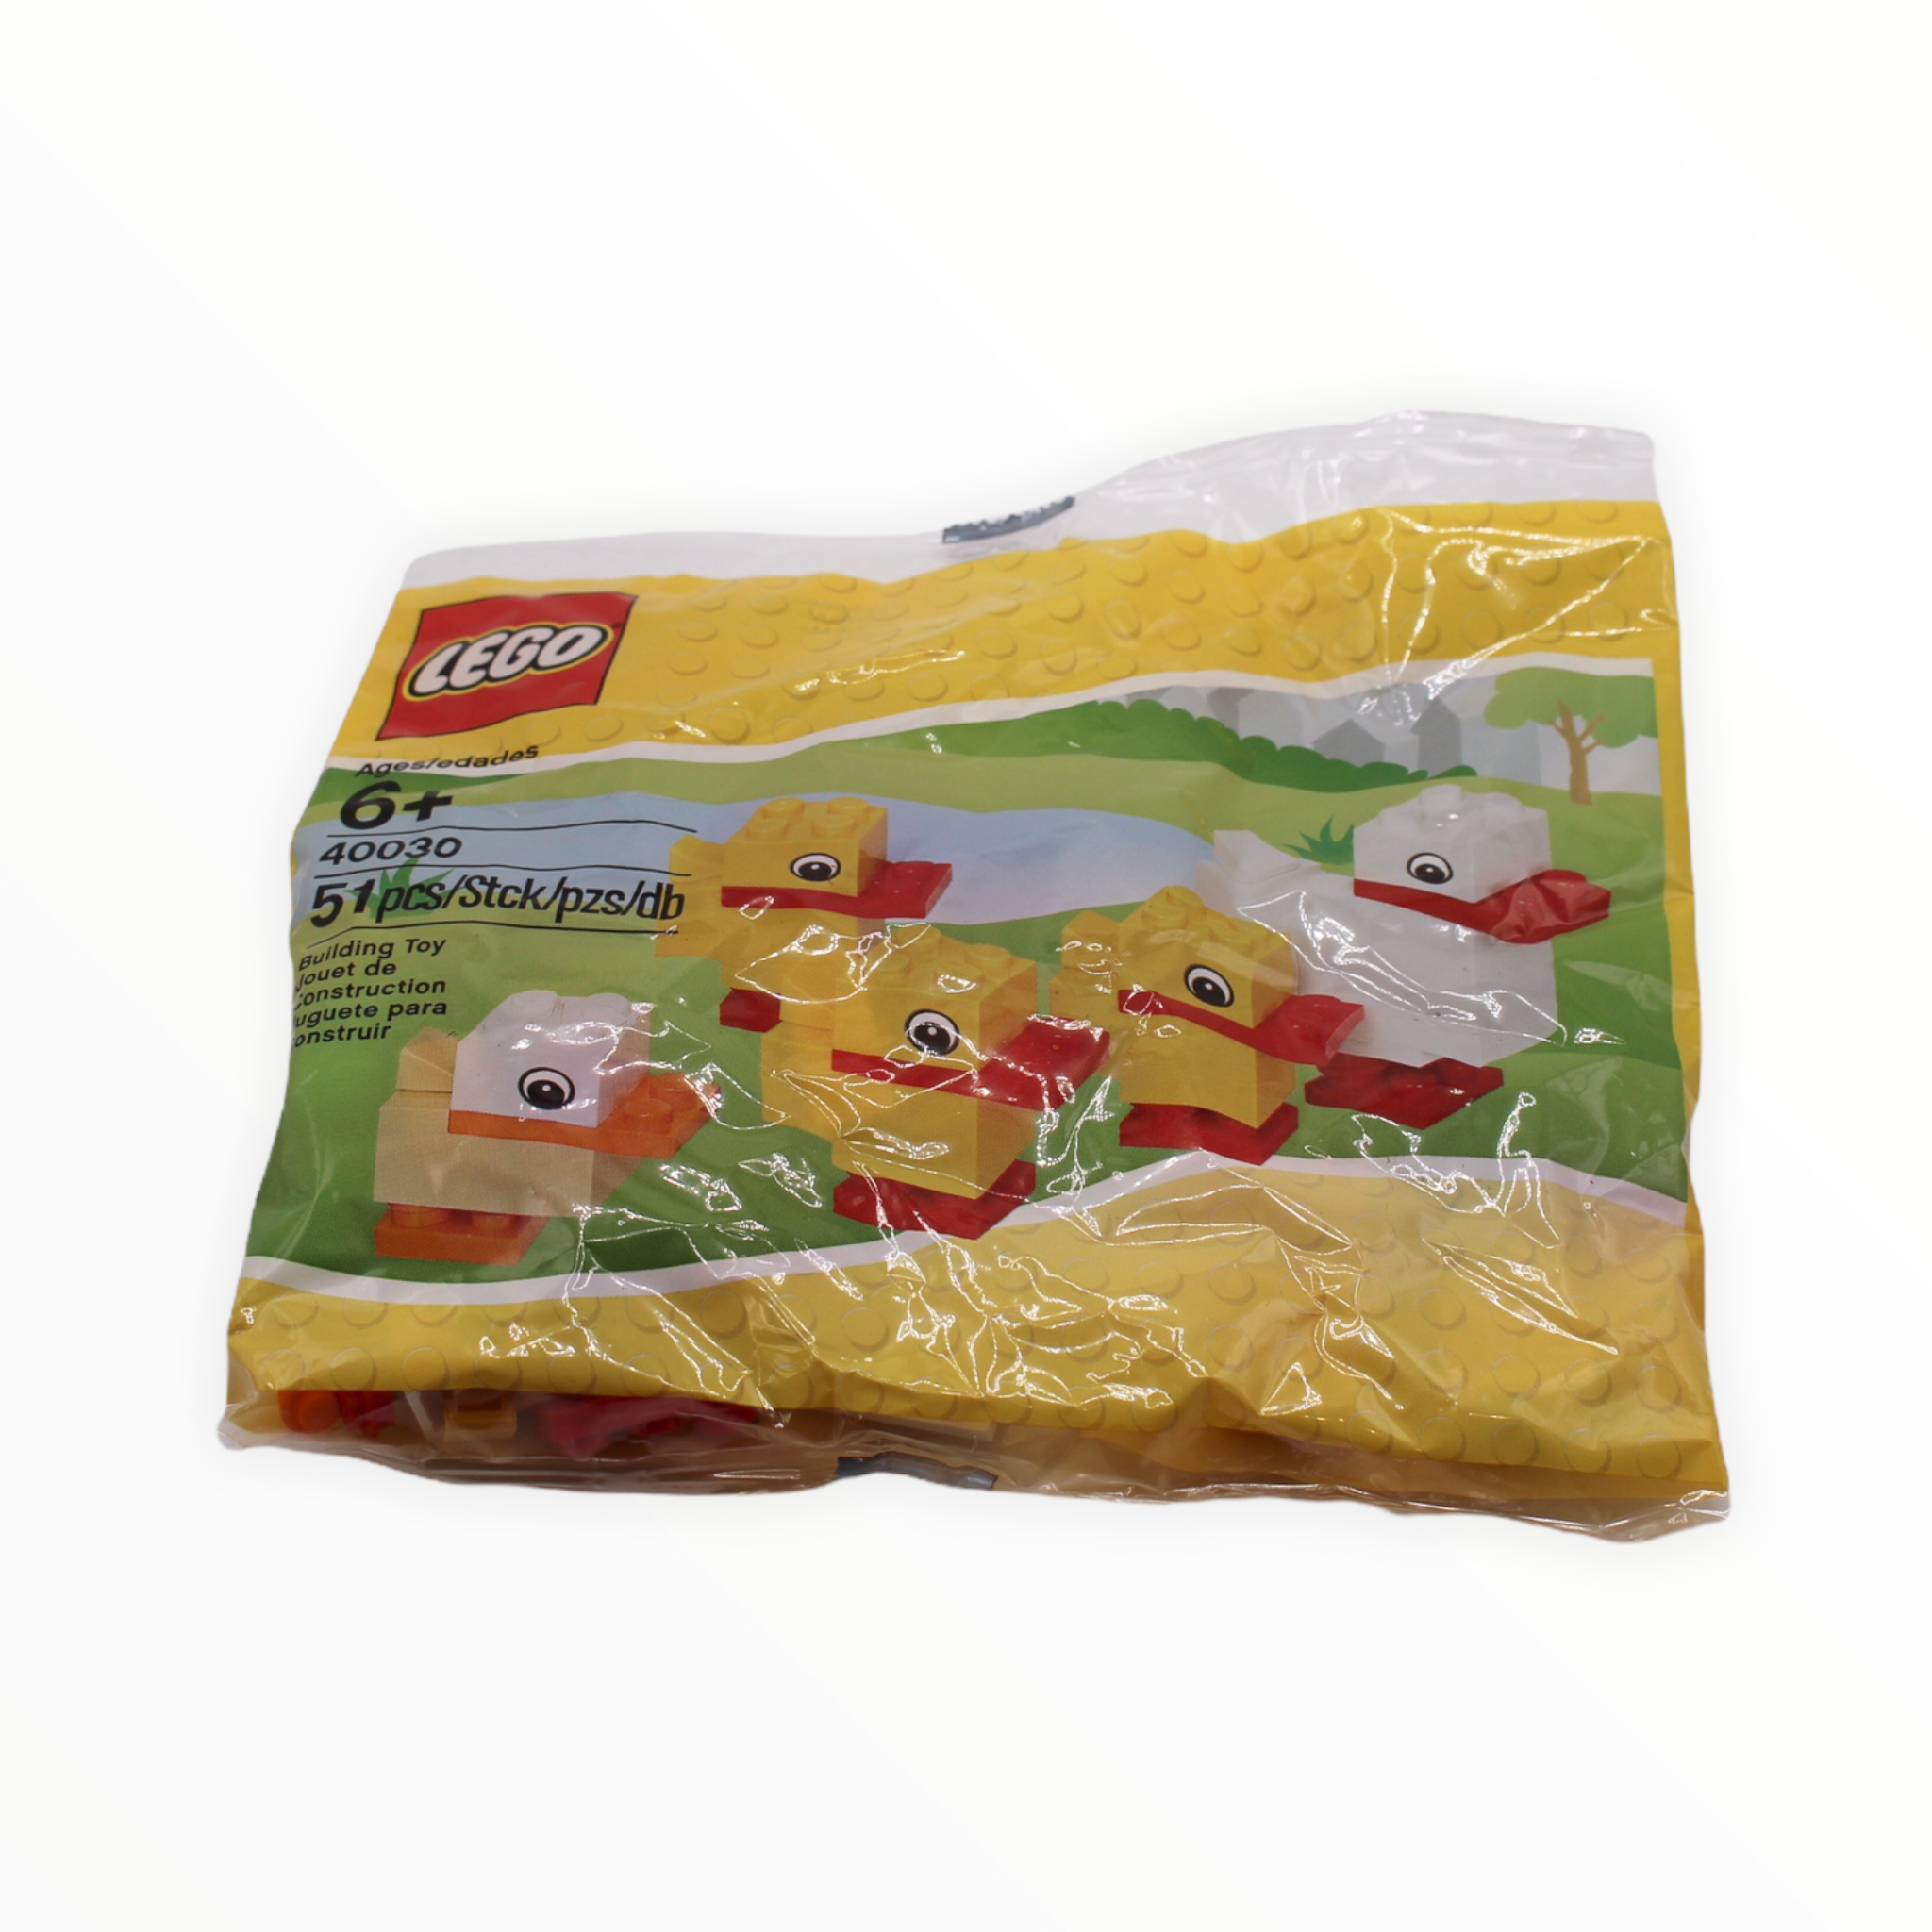 Polybag 40030 LEGO Duck with Ducklings